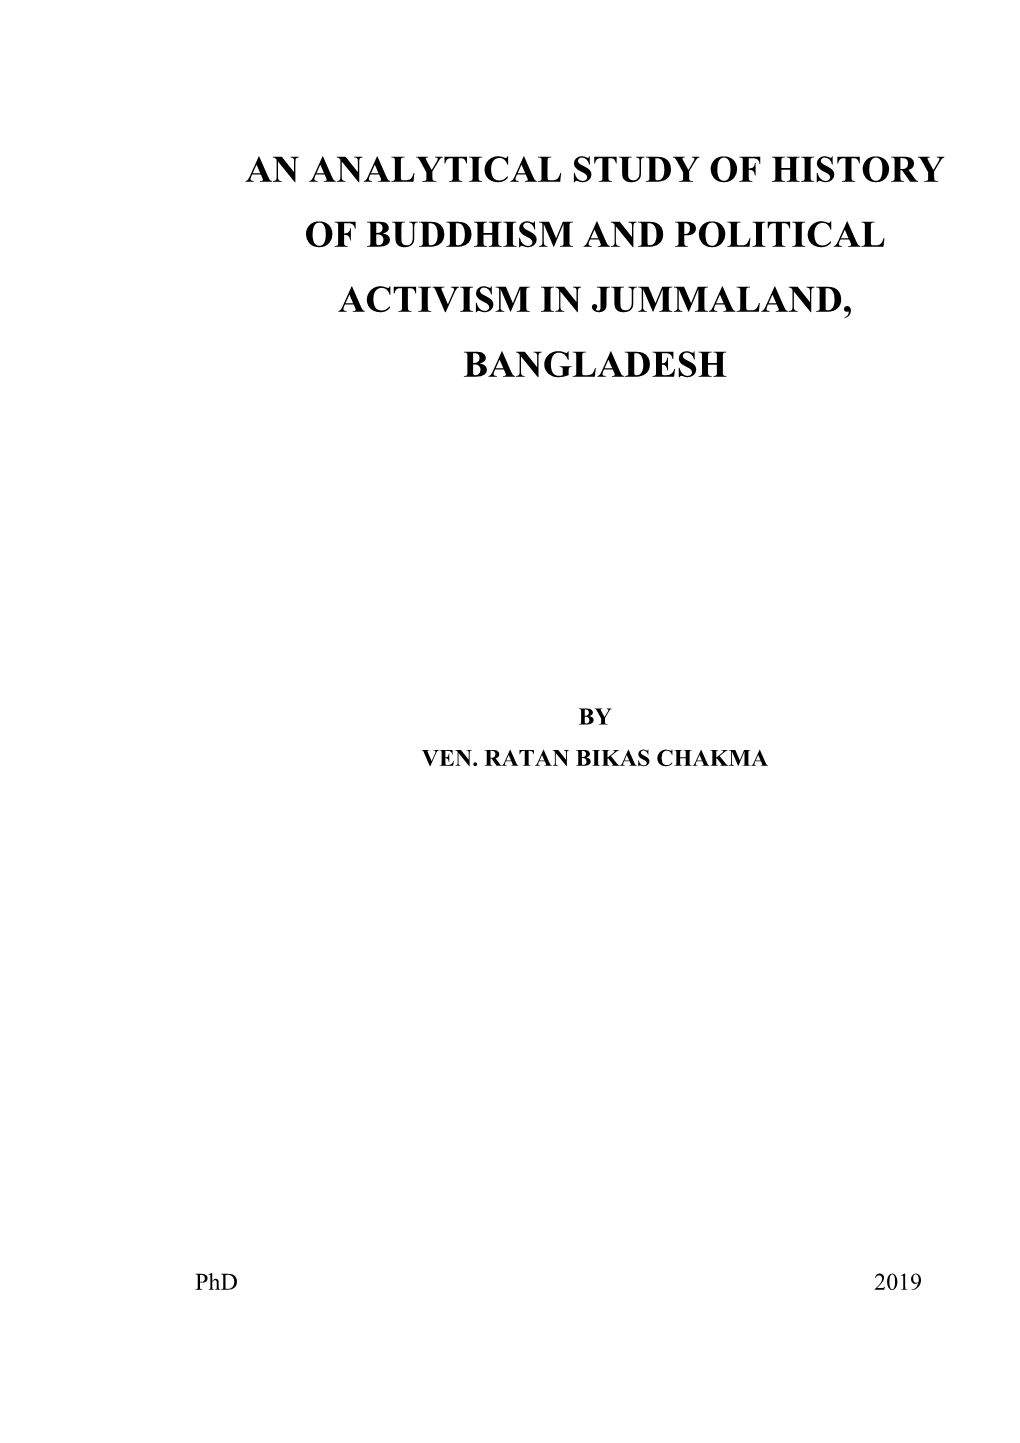 An Analytical Study of History of Buddhism and Political Activism in Jummaland, Bangladesh